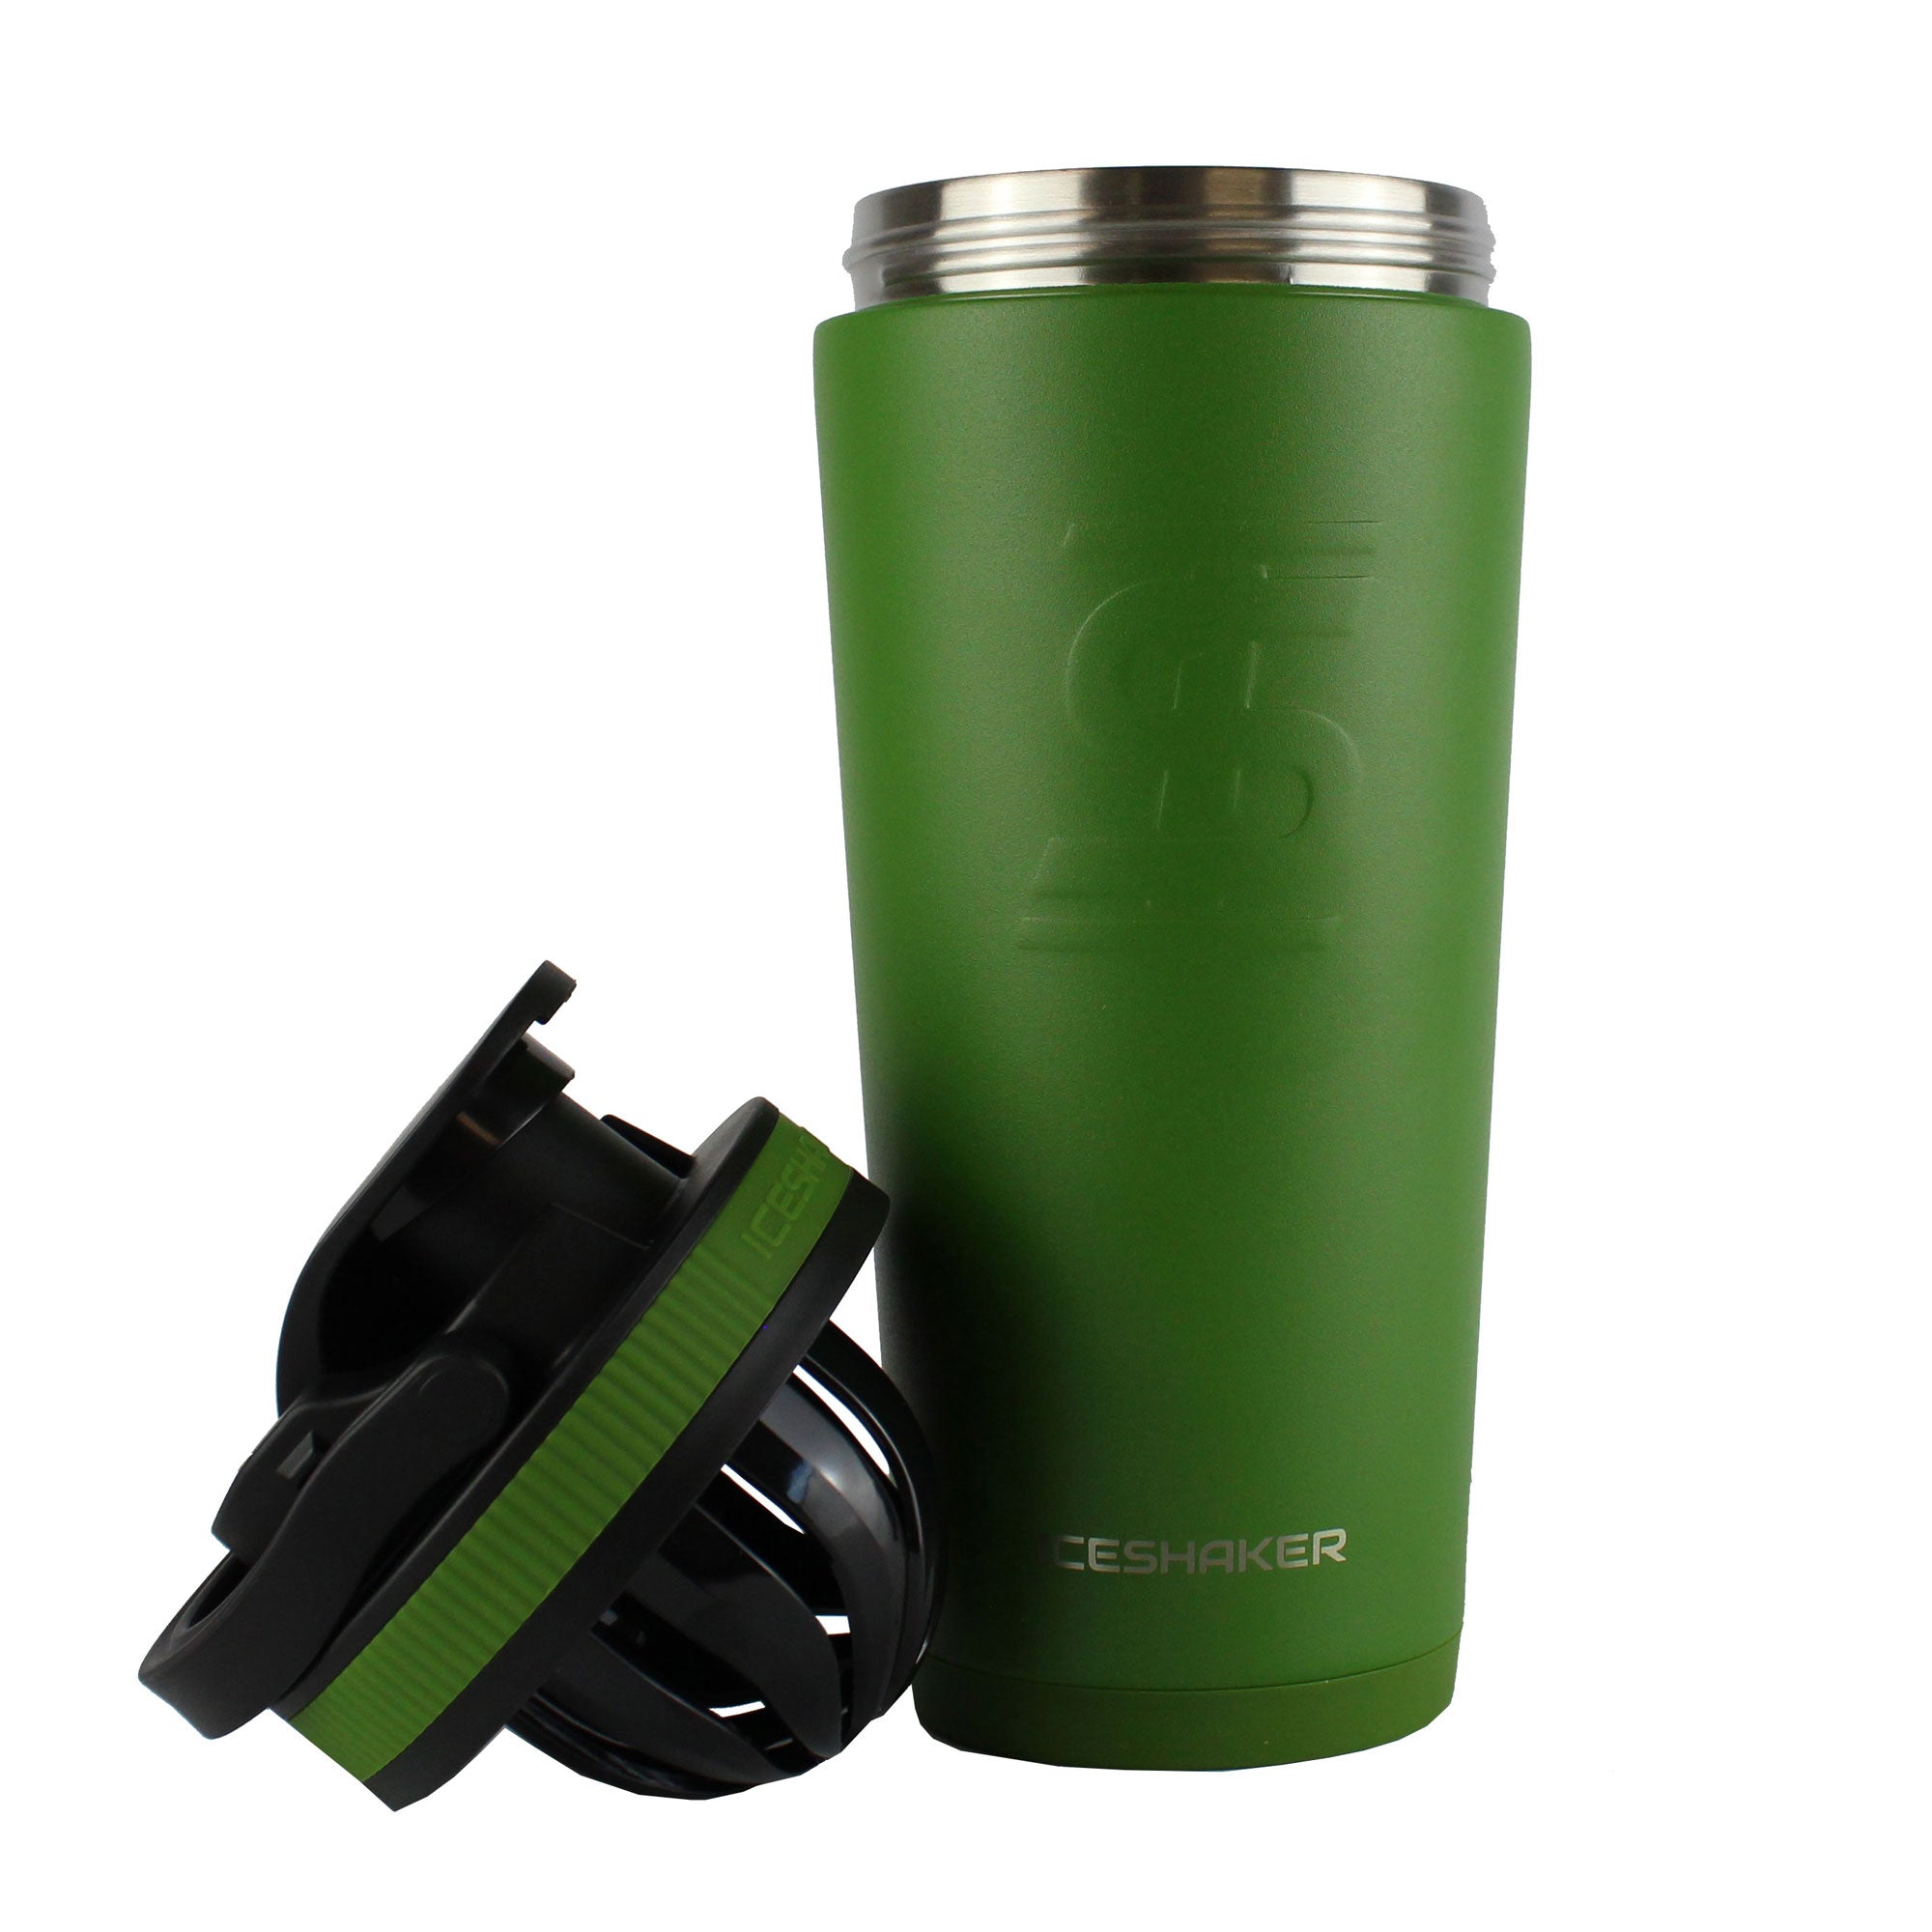 Special Forces Charitable Trust 26oz Ice Shaker - Green